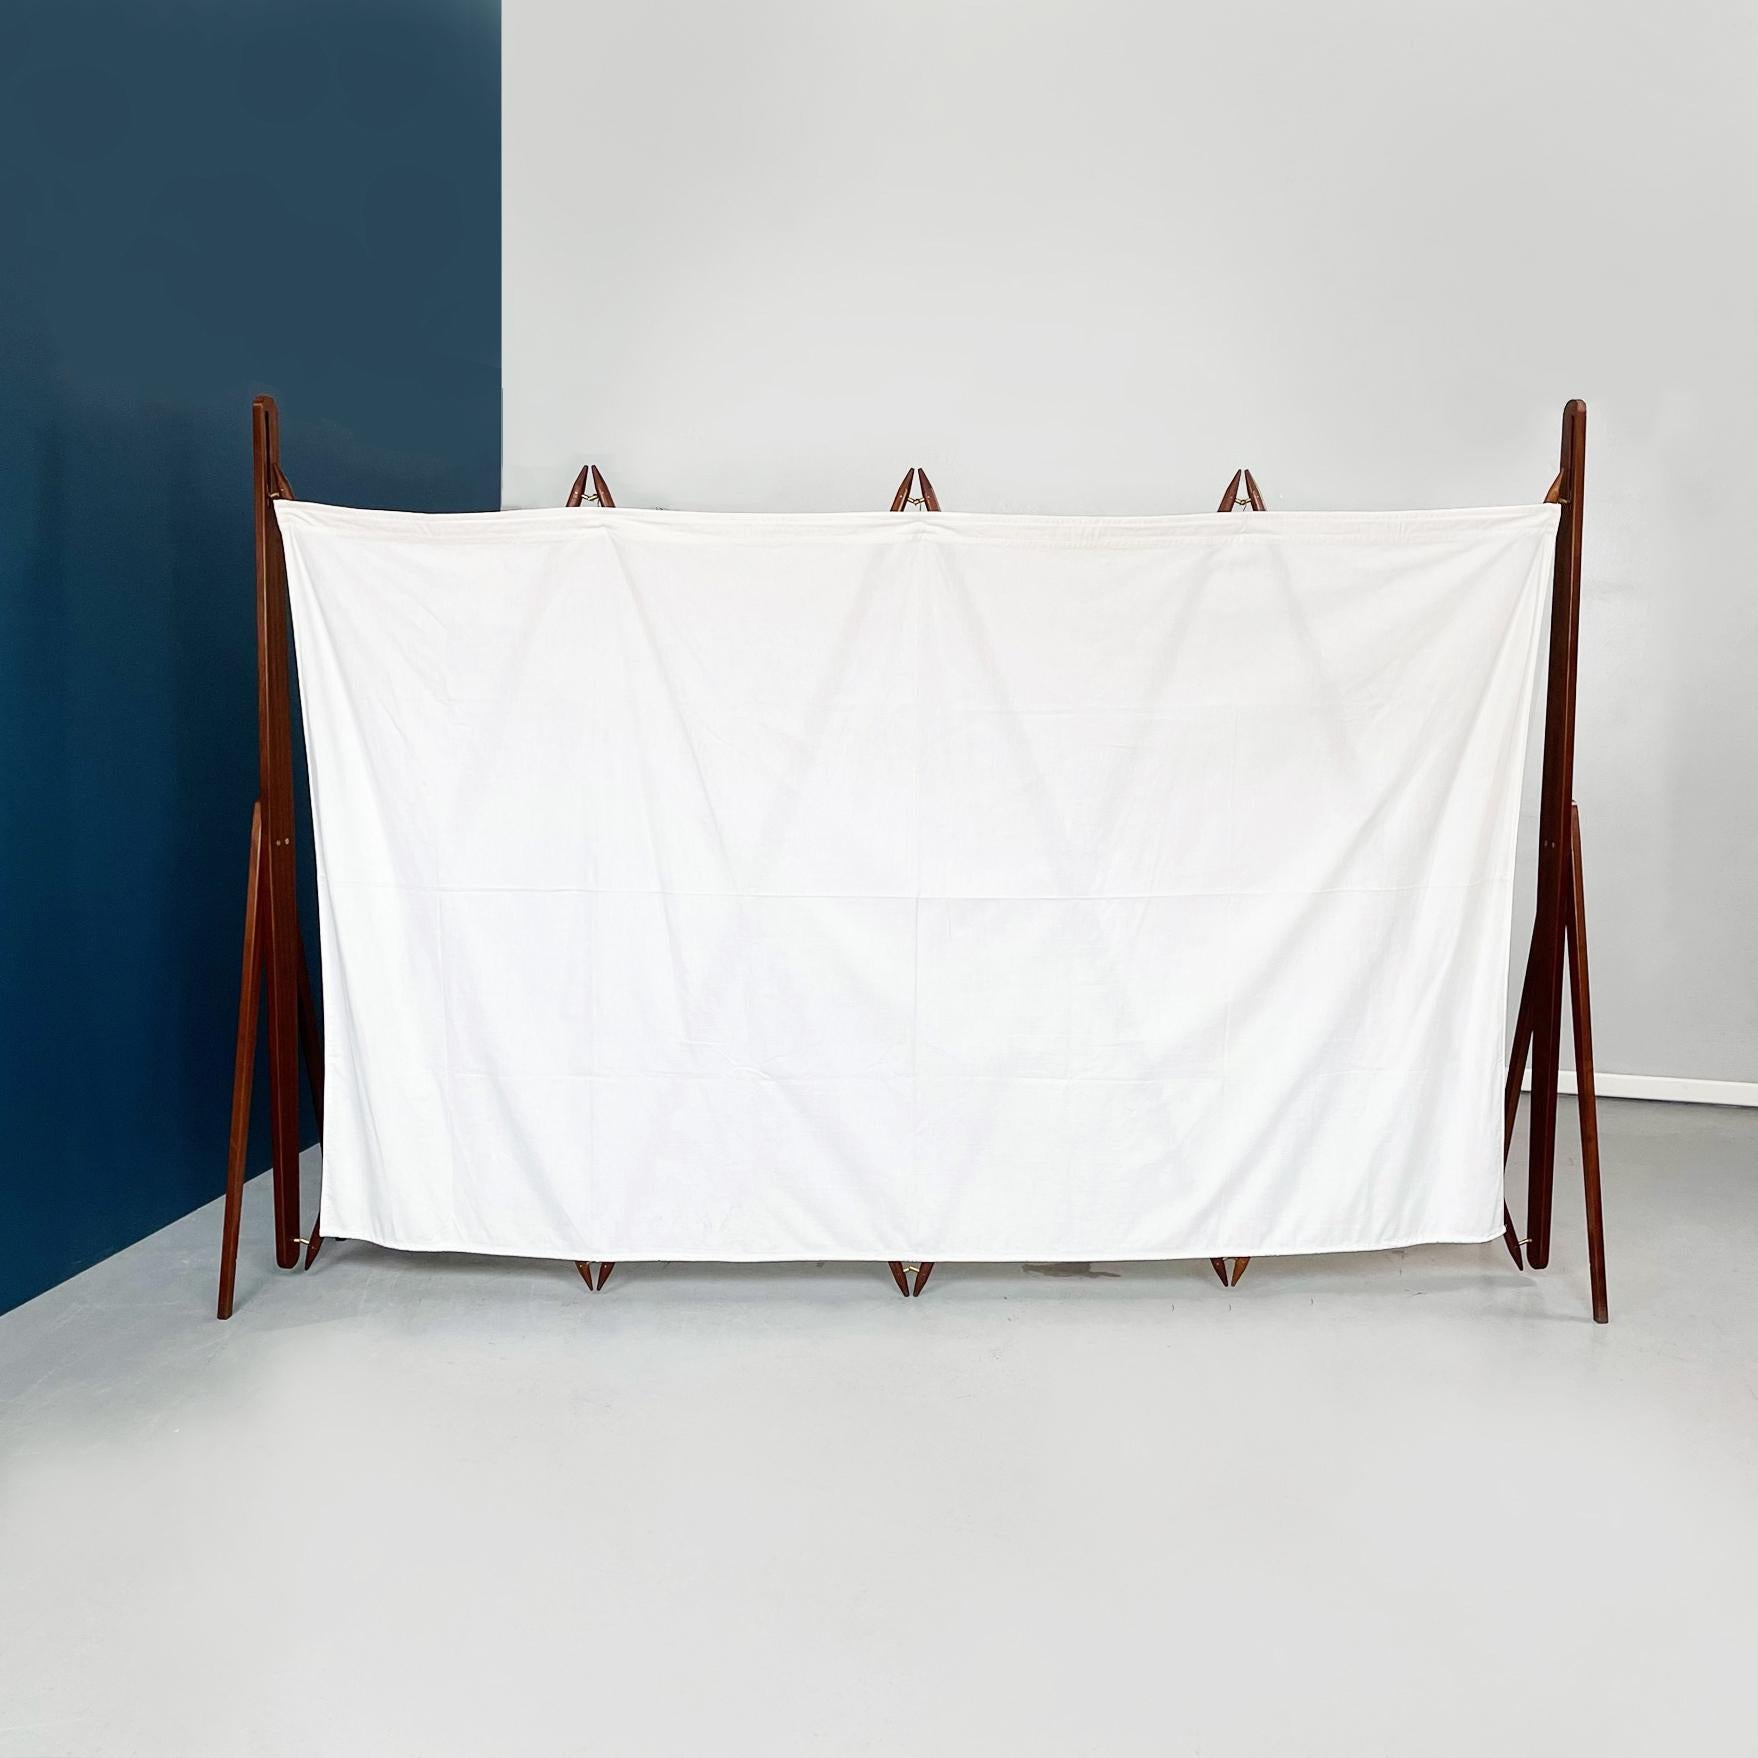 Mid-Century Modern Italian Mid-Century Rectangular Divider in Wood, White Fabric and Metal, 1950s For Sale